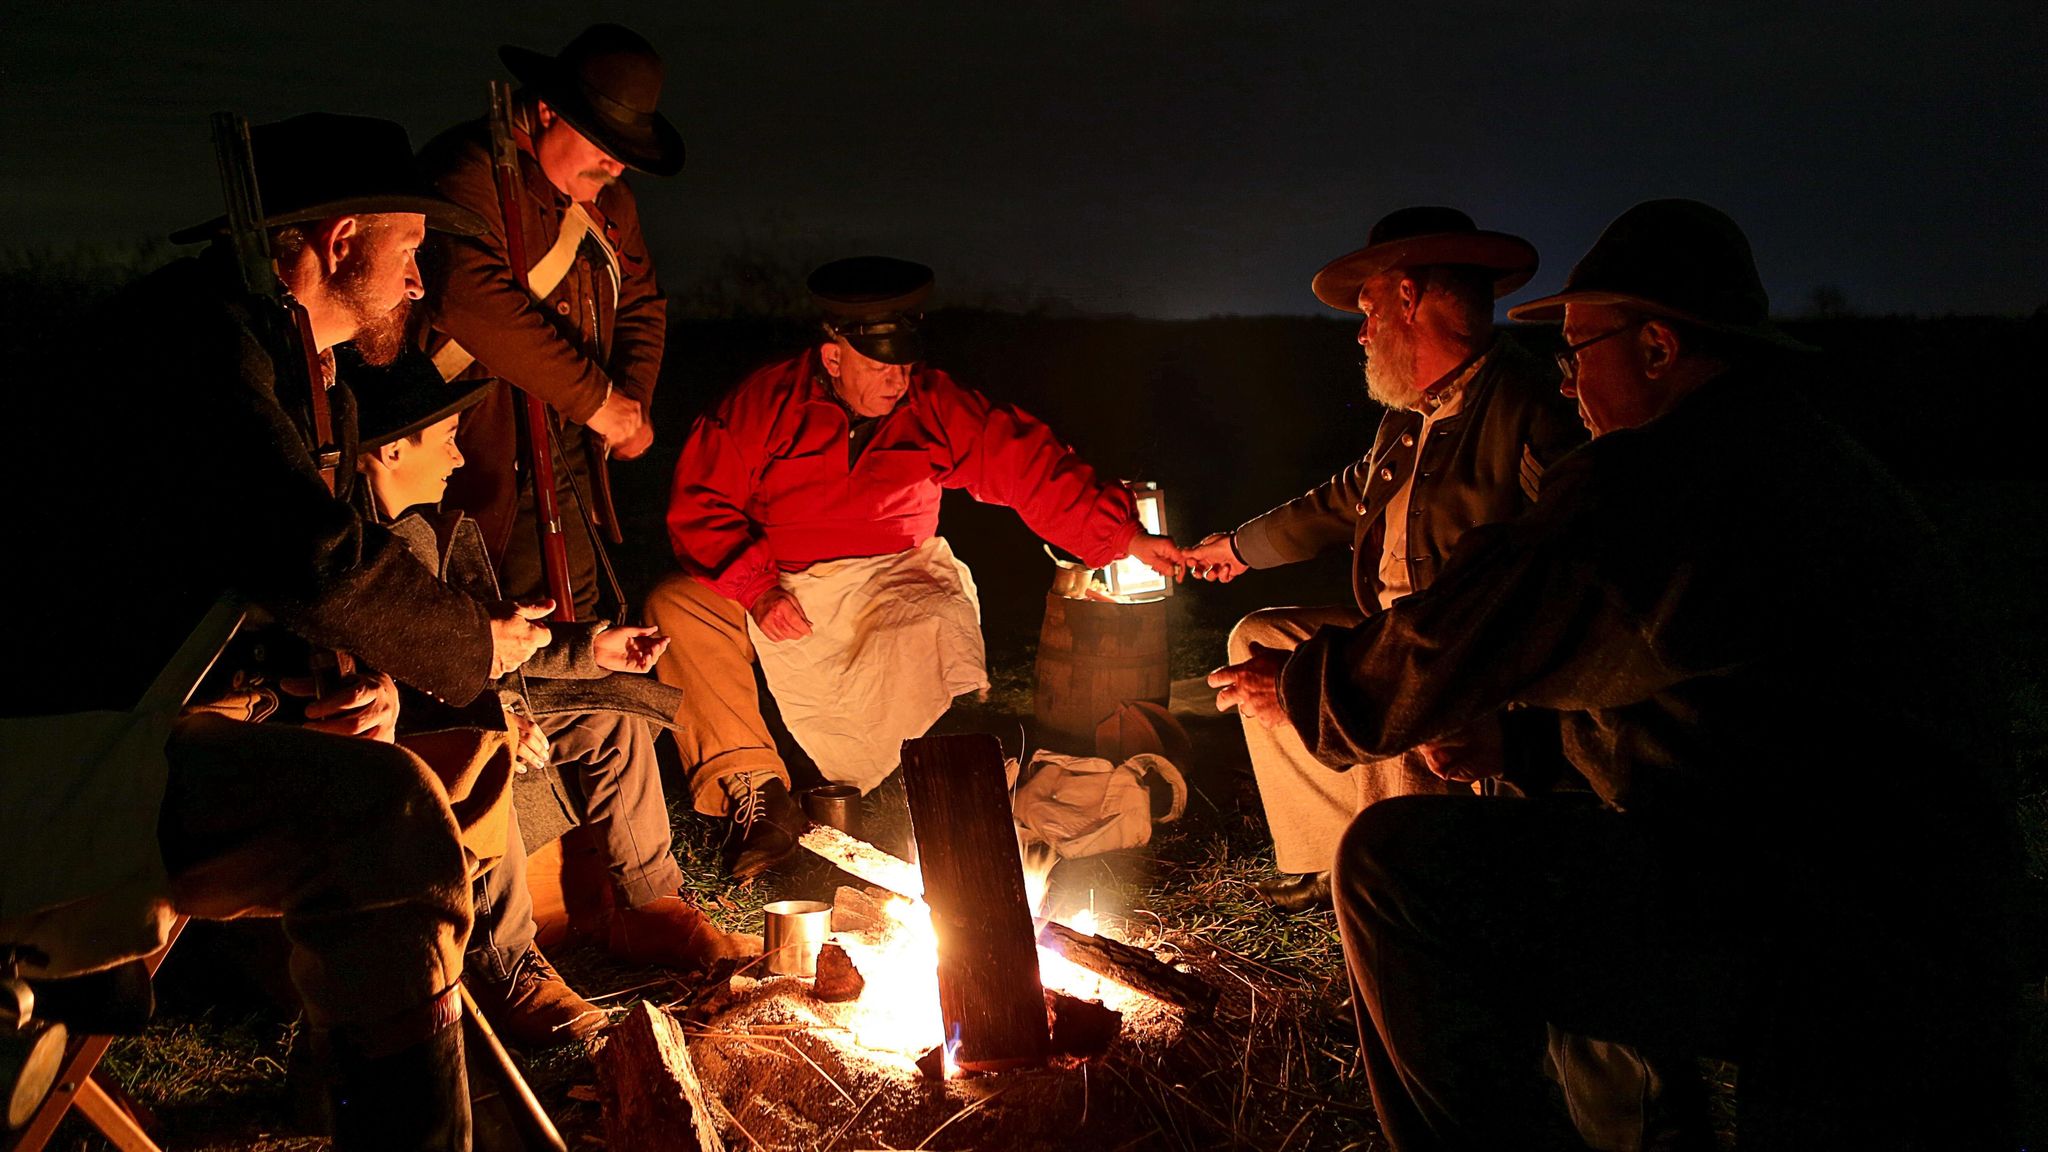 Living history volunteers act out a scene during the annual Moonlight Tours event